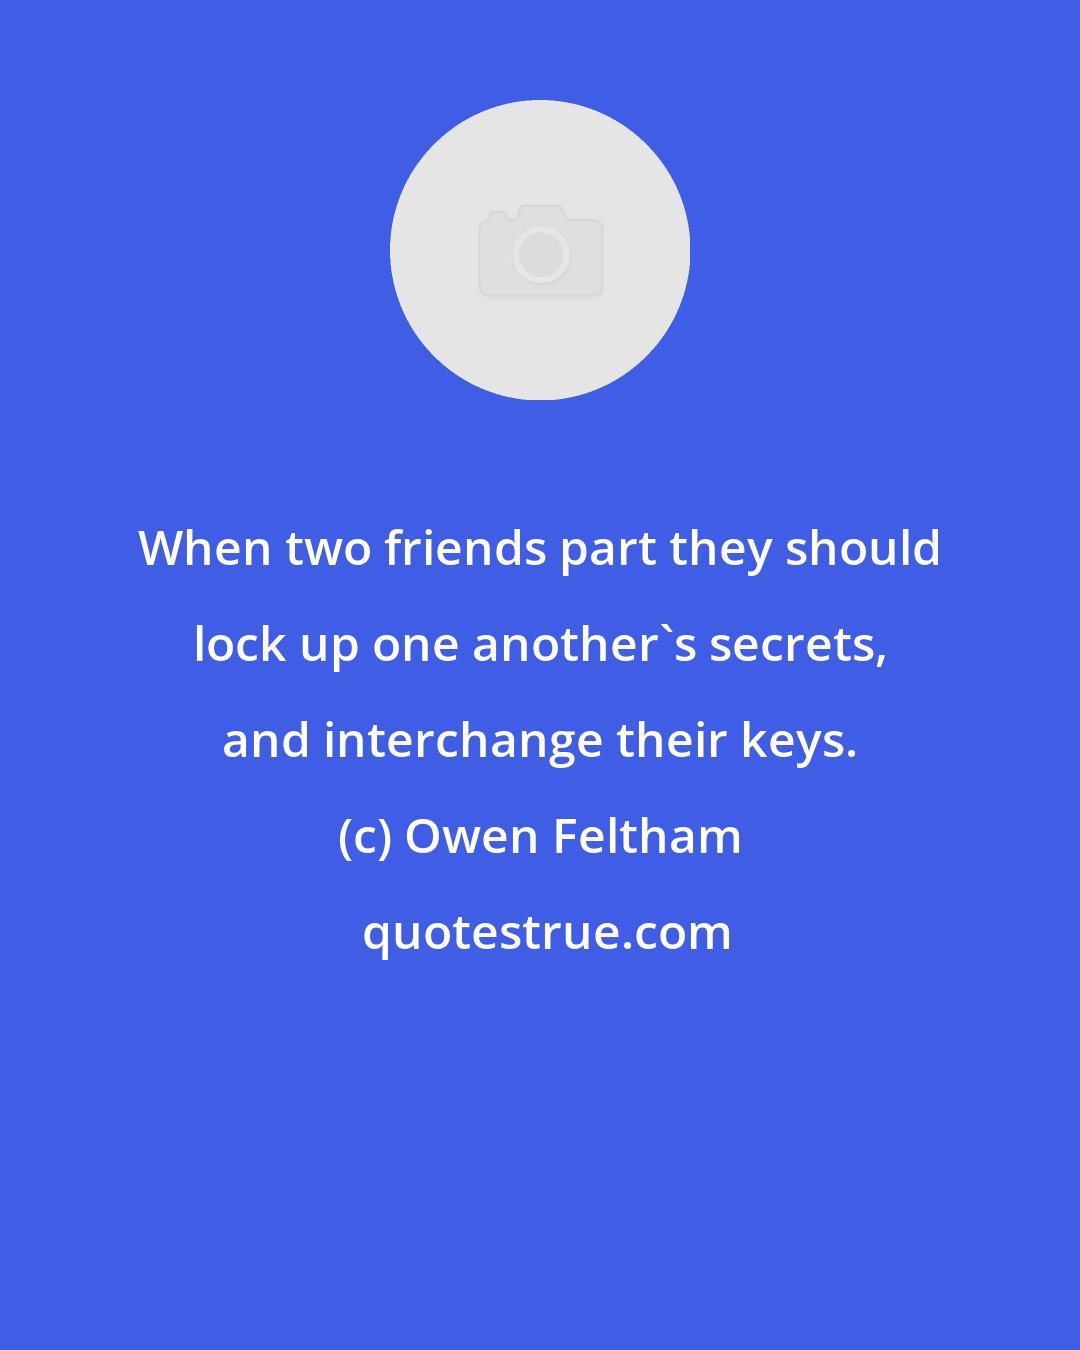 Owen Feltham: When two friends part they should lock up one another's secrets, and interchange their keys.